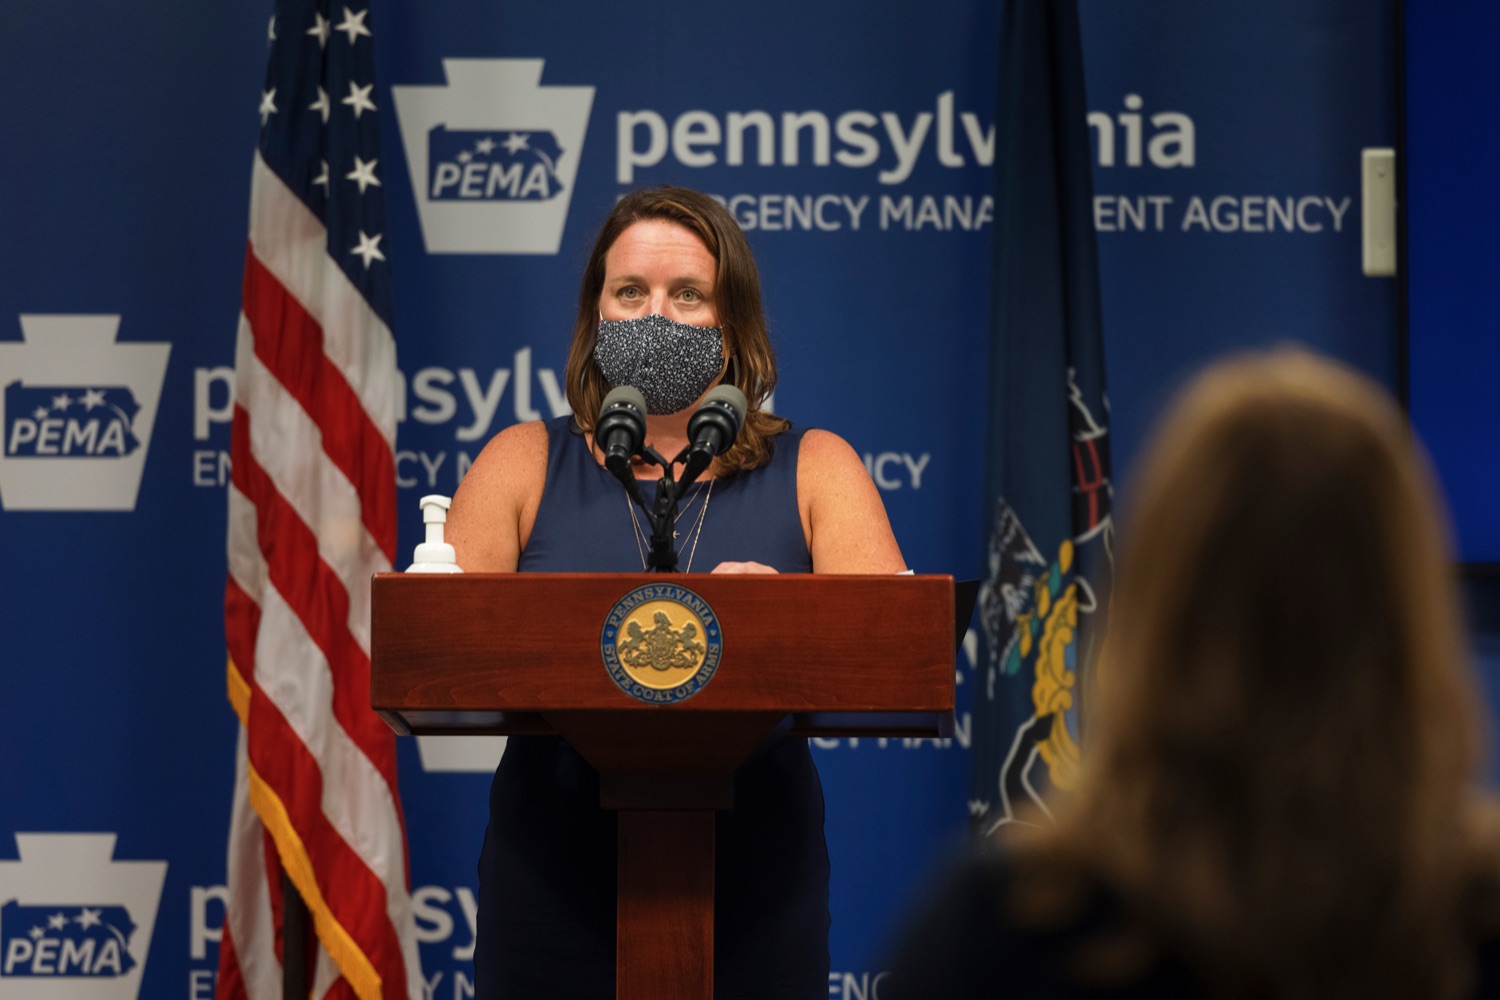 Human Services Acting Secretary Meg Snead speaks during a press conference, which discussed the current state of COVID-19 and a new Secretary of Health order requiring masks to be worn inside K-12 school buildings, early learning programs and child care providers, inside Pennsylvania Emergency Management Agency in Harrisburg on Tuesday, August 31, 2021.<br><a href="https://filesource.amperwave.net/commonwealthofpa/photo/19089_GOV_School_Masking_NK_012.jpg" target="_blank">⇣ Download Photo</a>